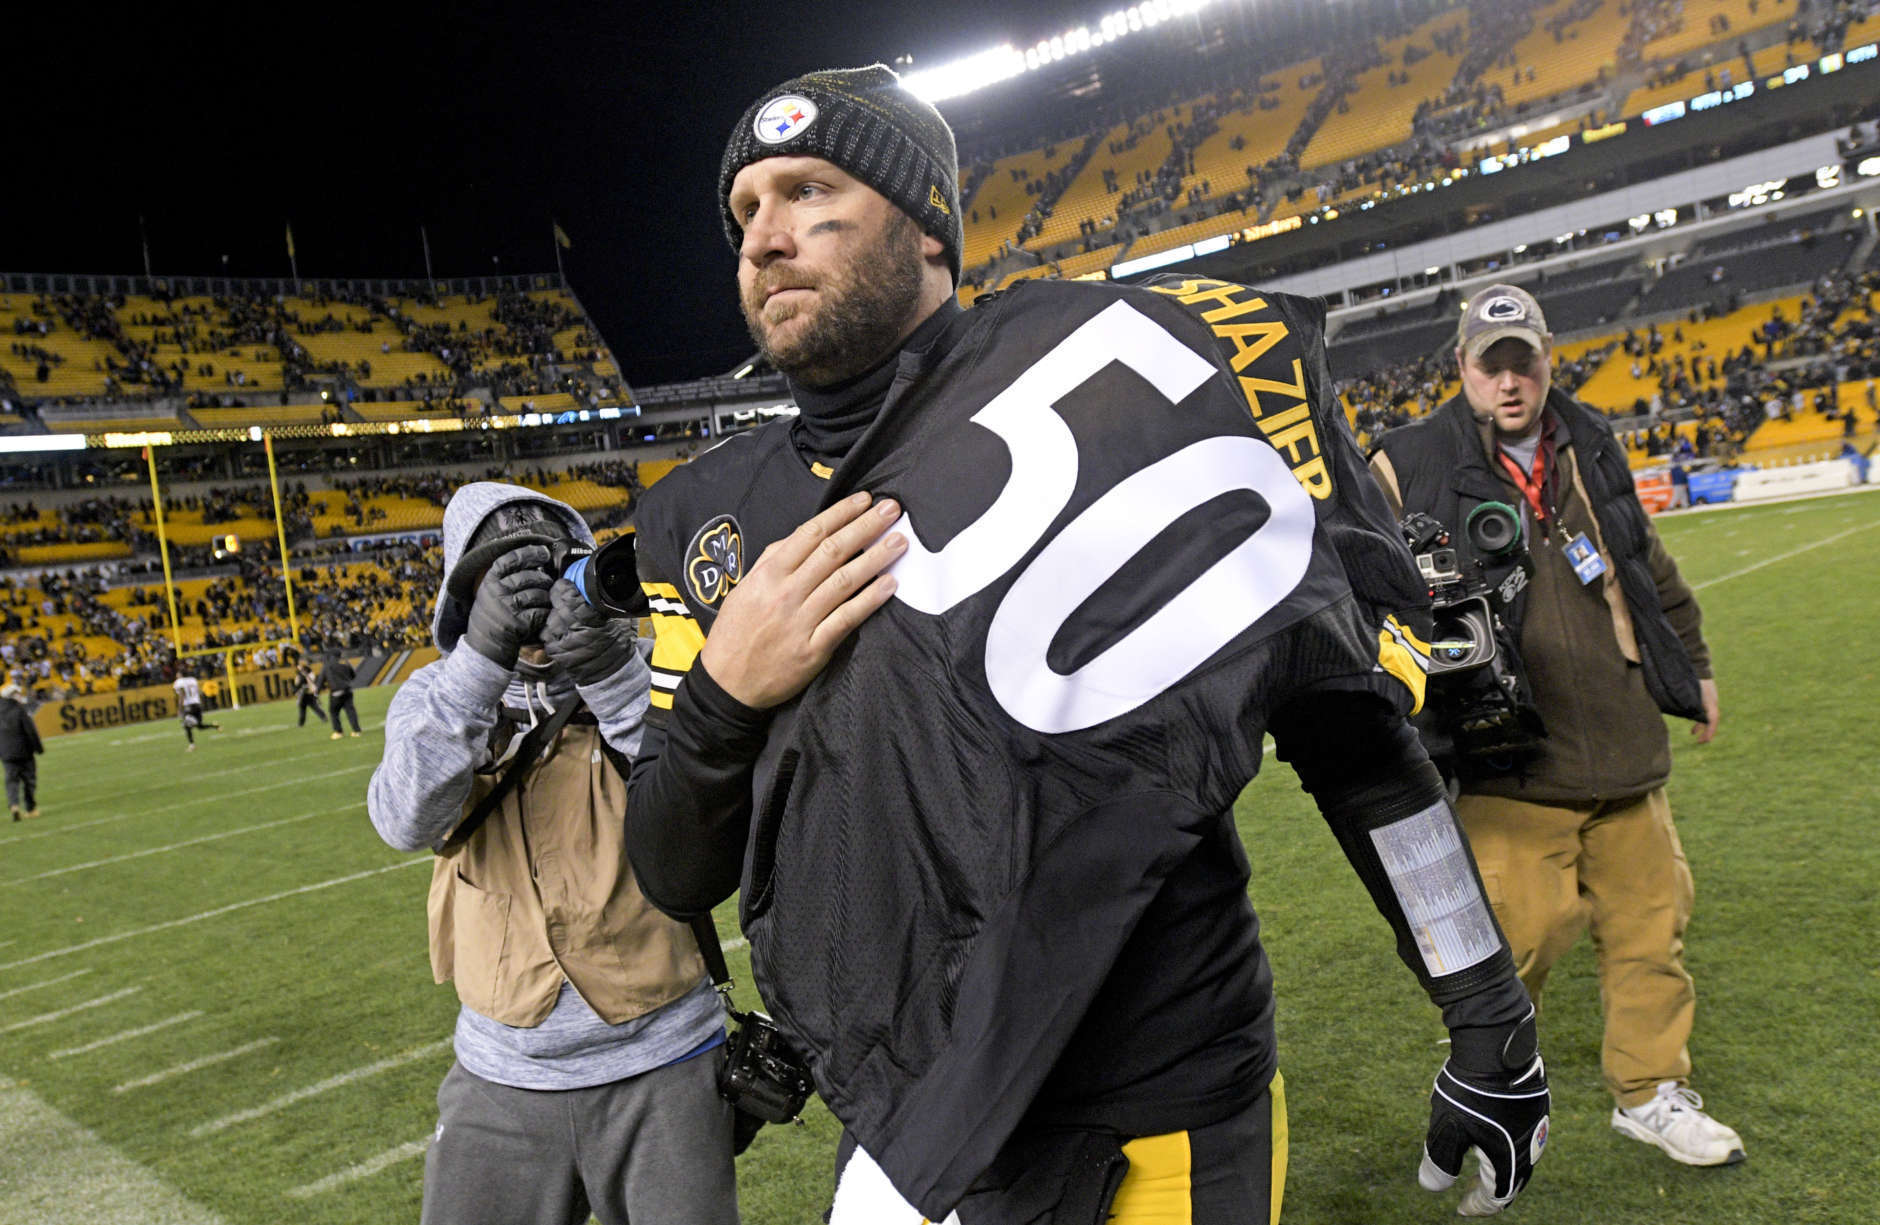 Pittsburgh Steelers quarterback Ben Roethlisberger (7) walks off the field holding the jersey of linebacker Ryan Shazier after beating the Baltimore Ravens 39-38 to clinch the AFC North Championship in an NFL football game in Pittsburgh, Monday, Dec. 11, 2017. Shazier suffered a spinal cord injury in last week's game and is recovering from surgery to stabilize his spine. (AP Photo/Don Wright)